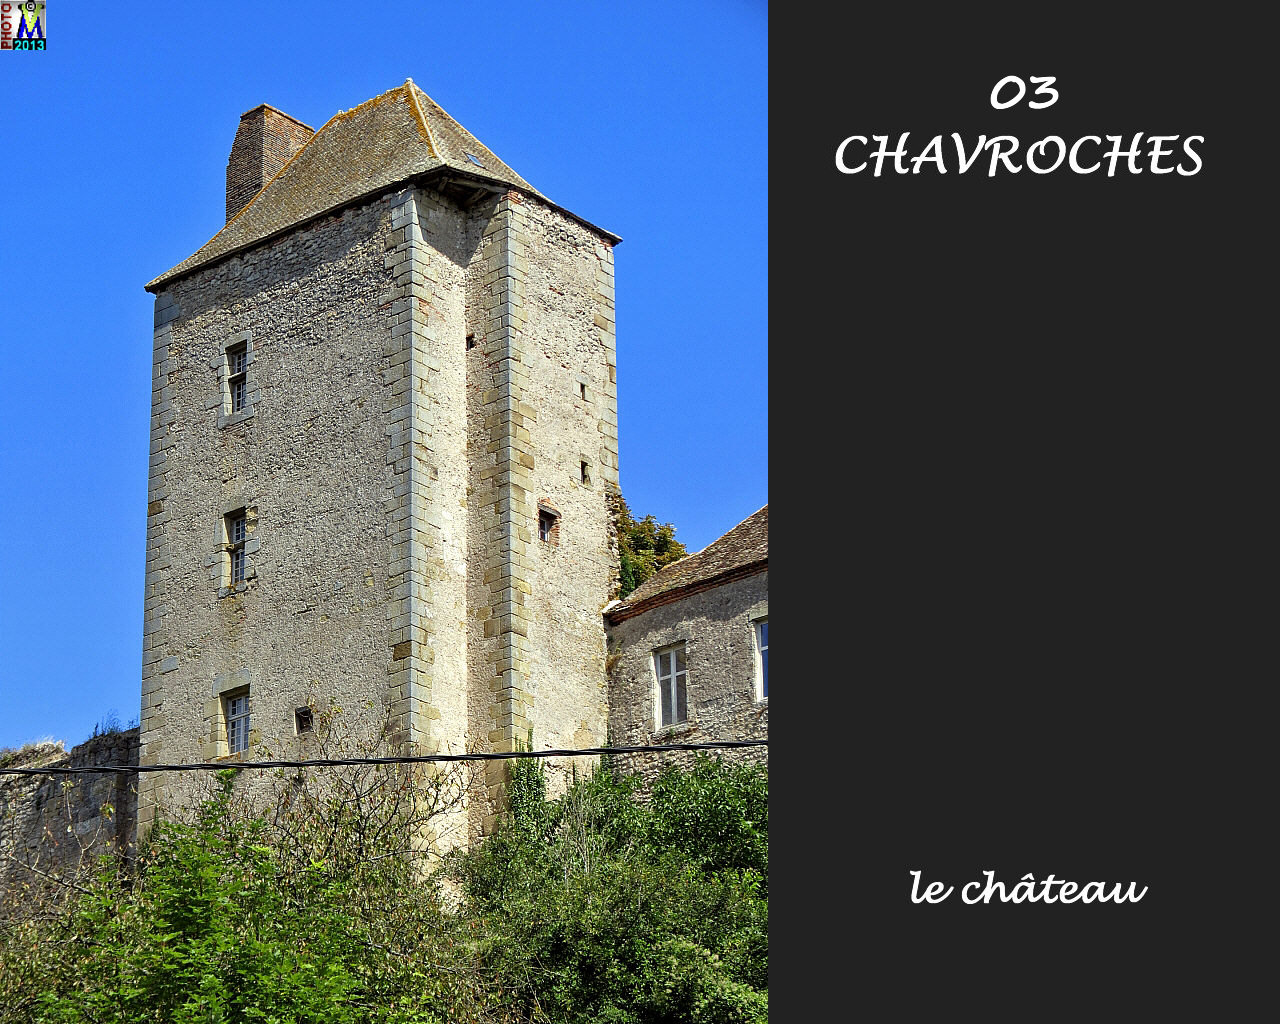 03CHAVROCHES_chateau_106.jpg